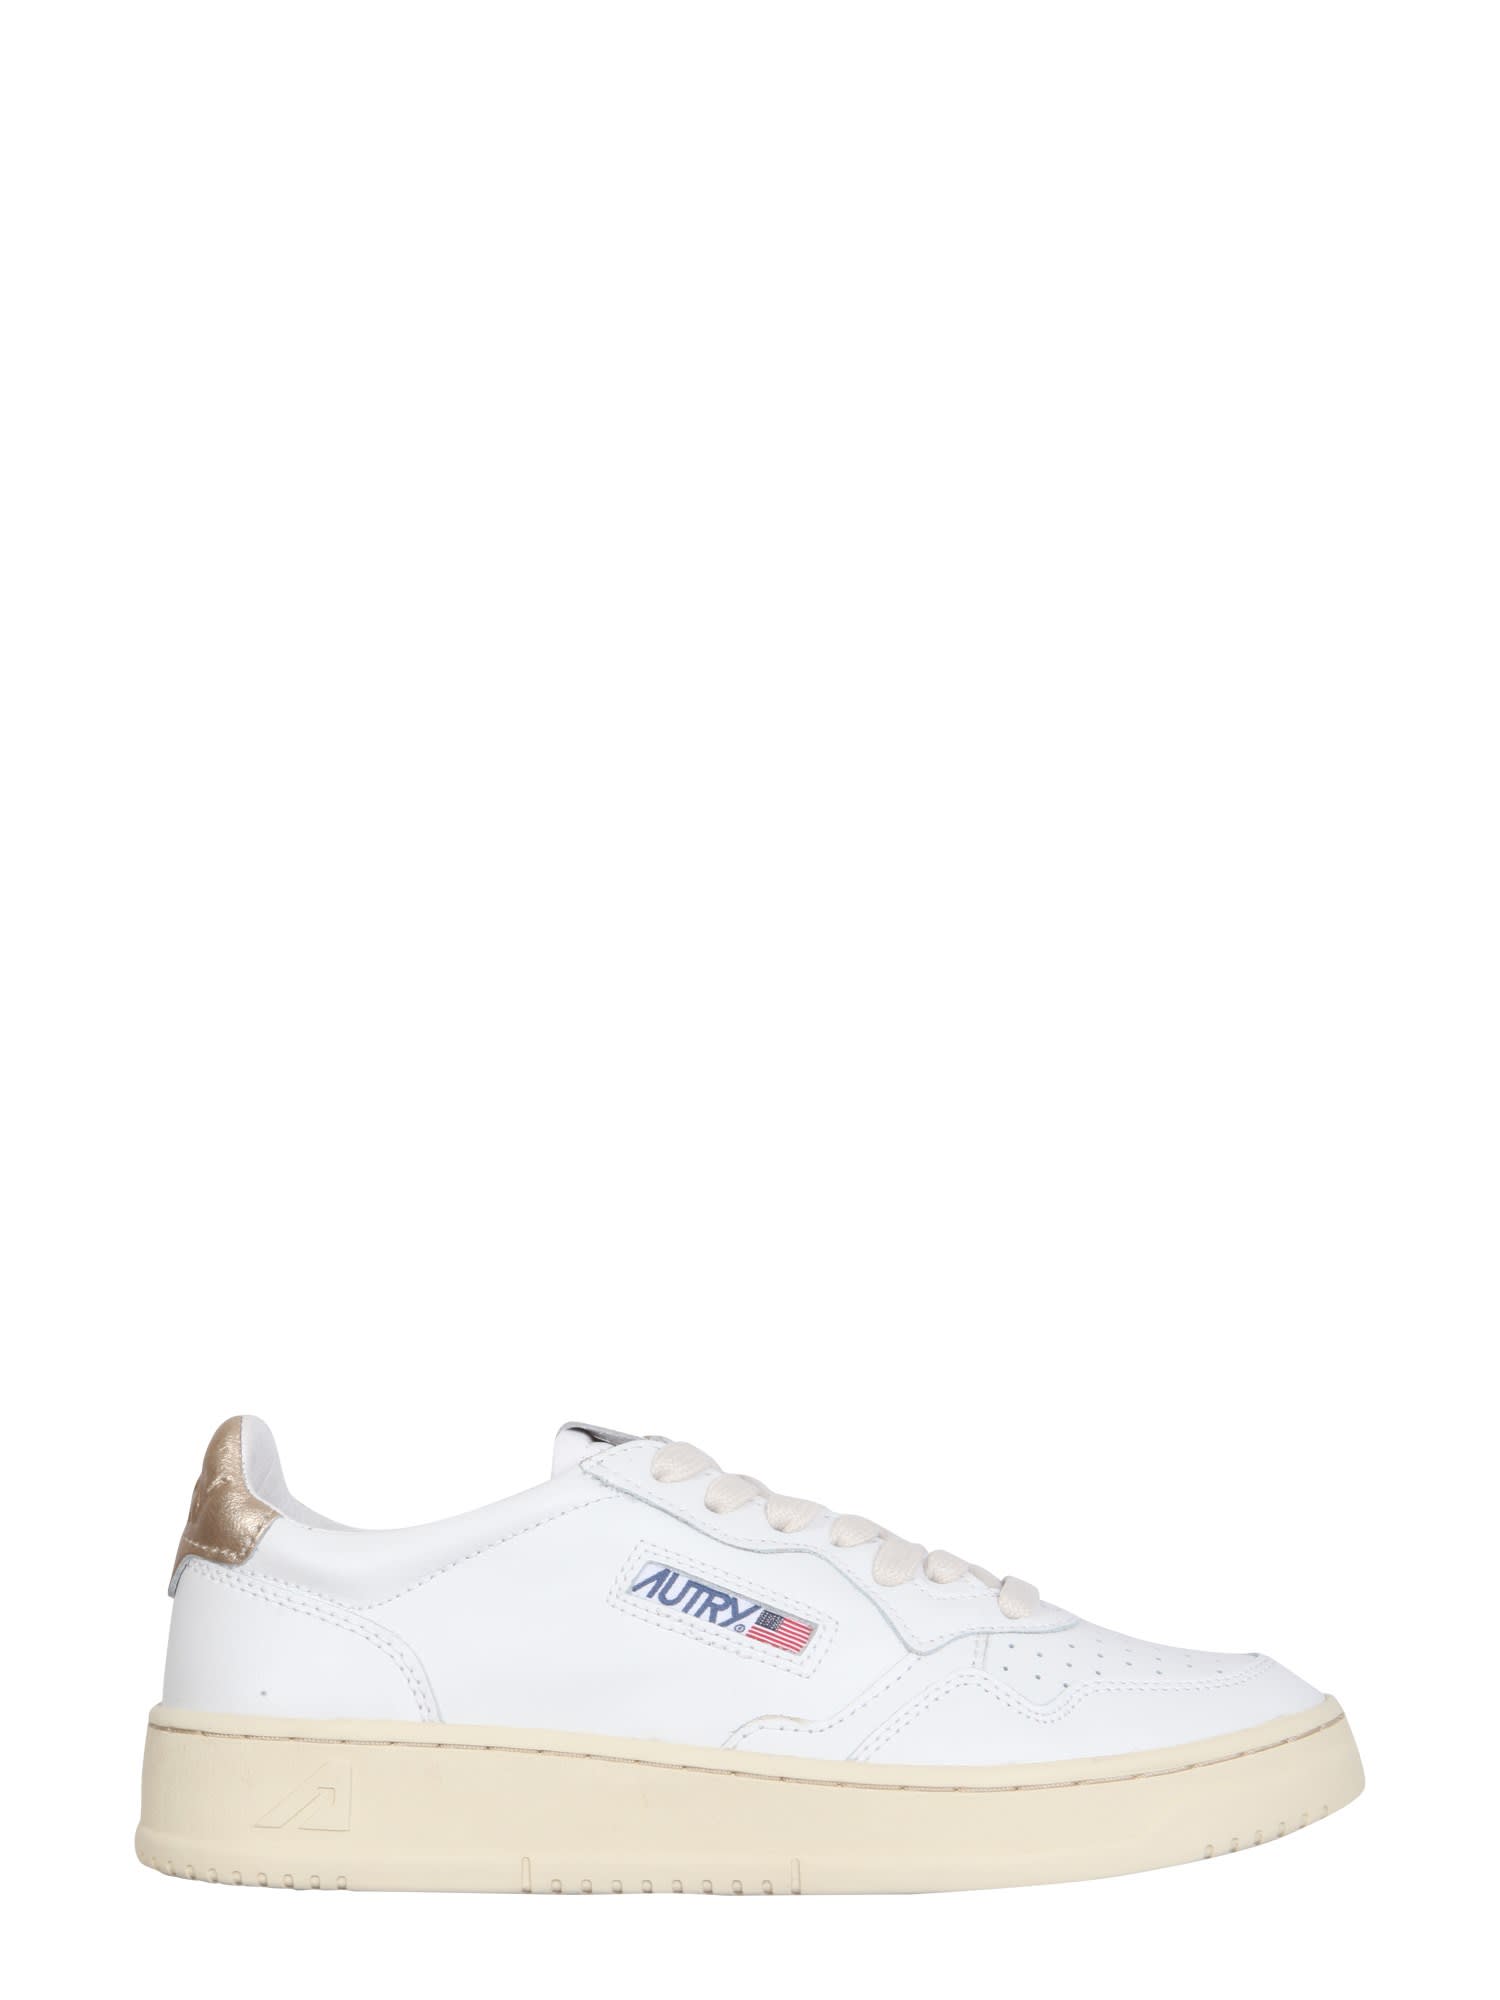 Autry Leather Sneakers In Leat White Gold